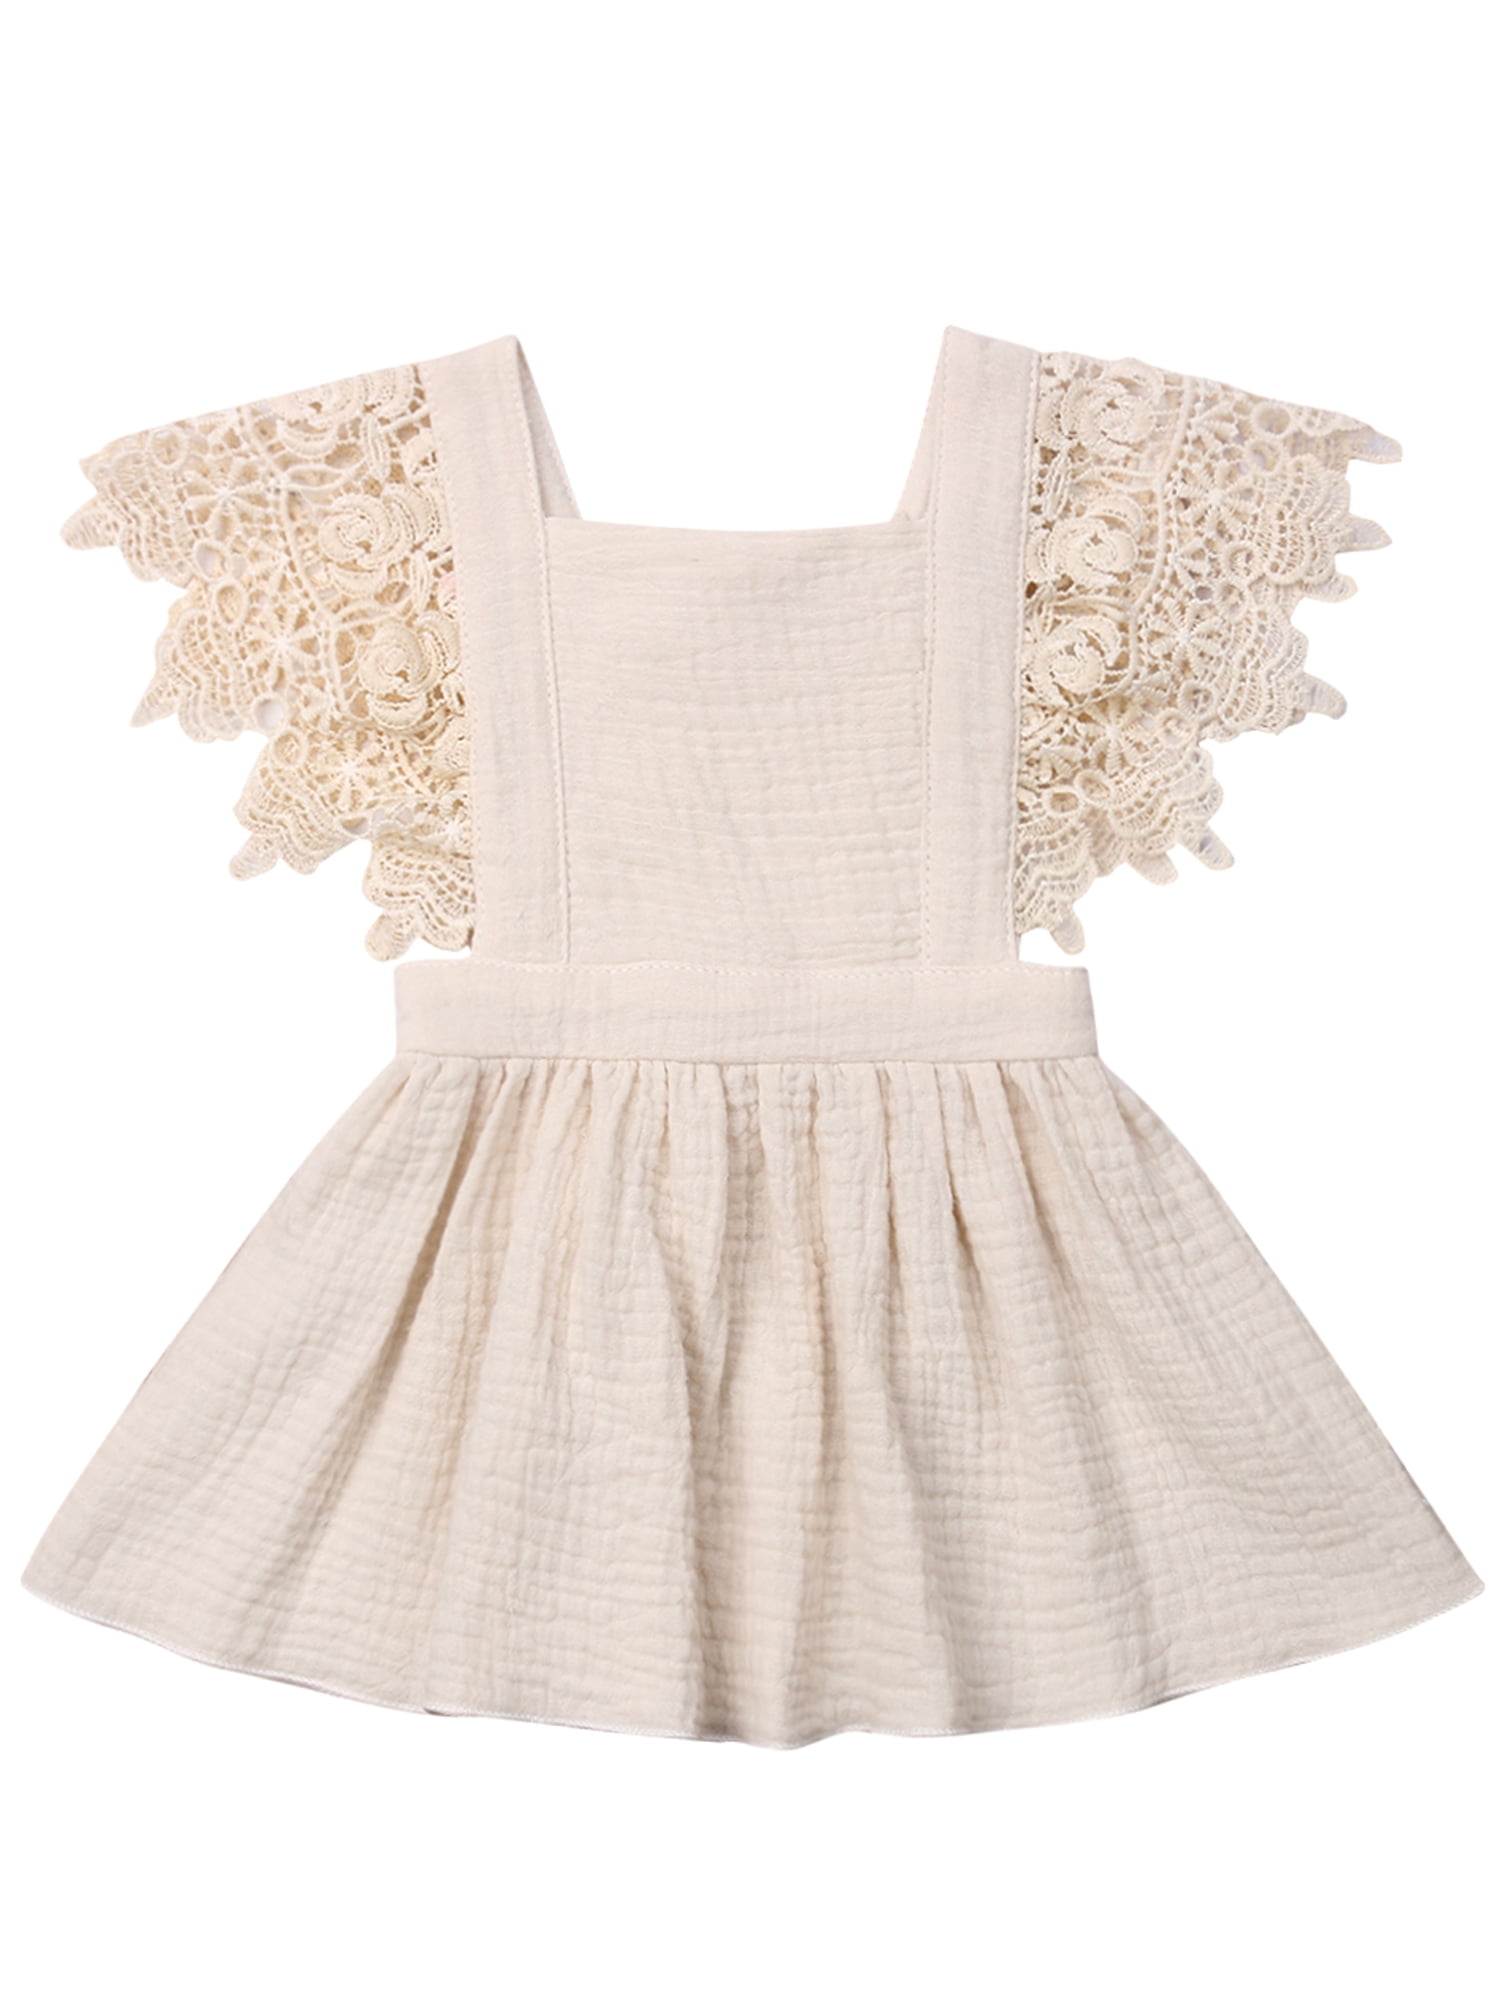 Toddler Baby Girl Infant Comfy Cotton Linen Lace Princess Overall Dress ...